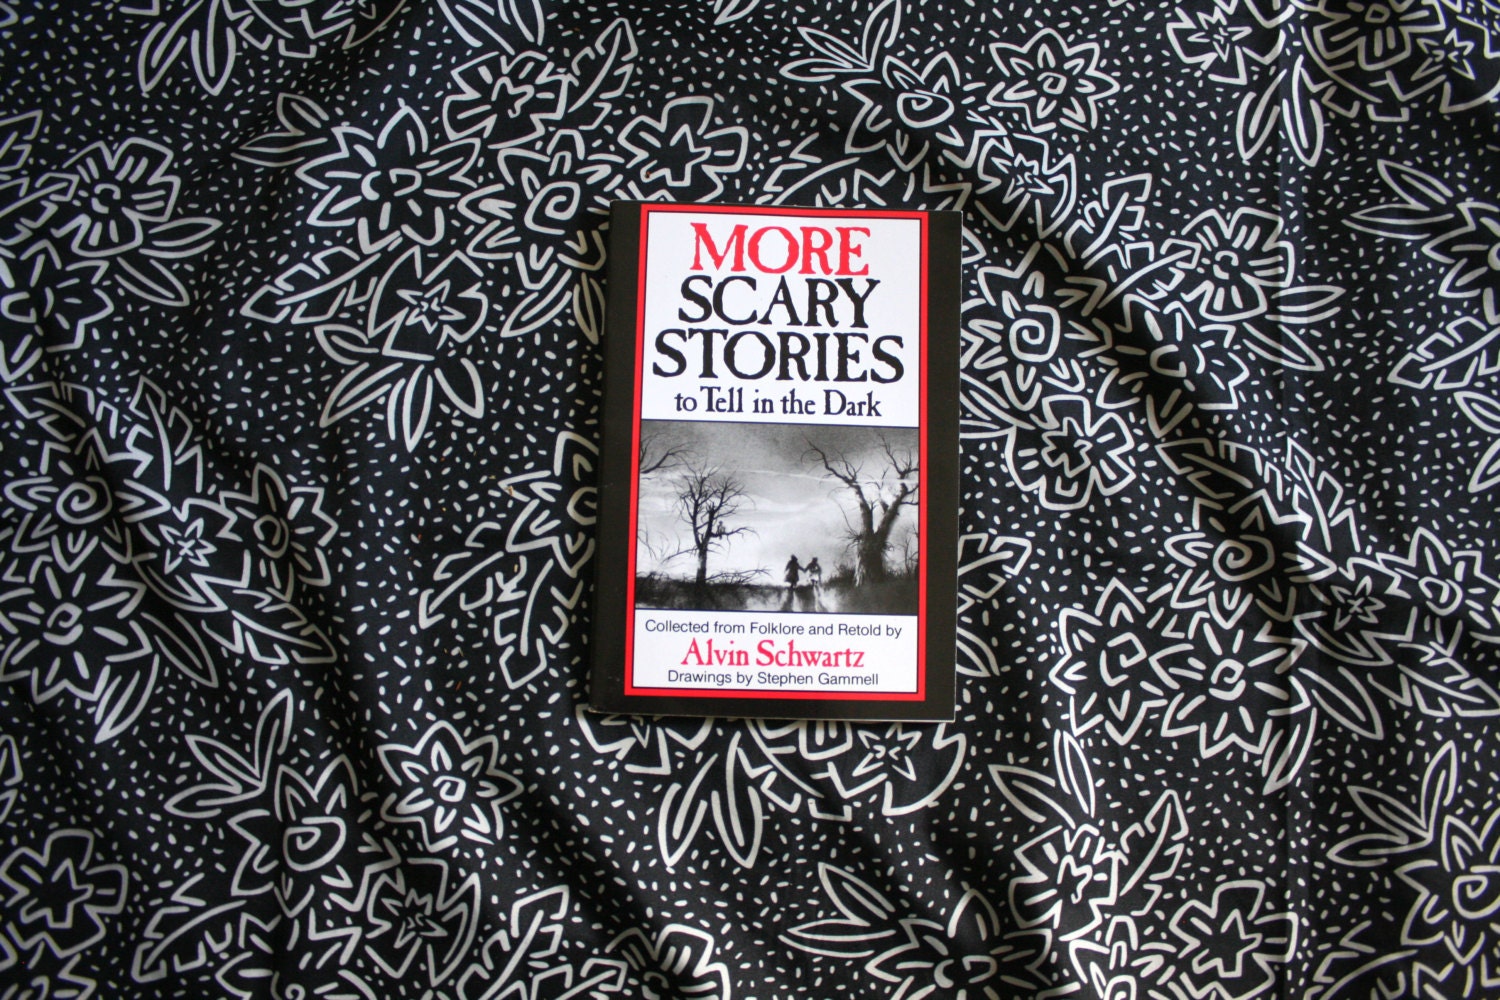 more scary stories to tell in the dark by alvin schwartz